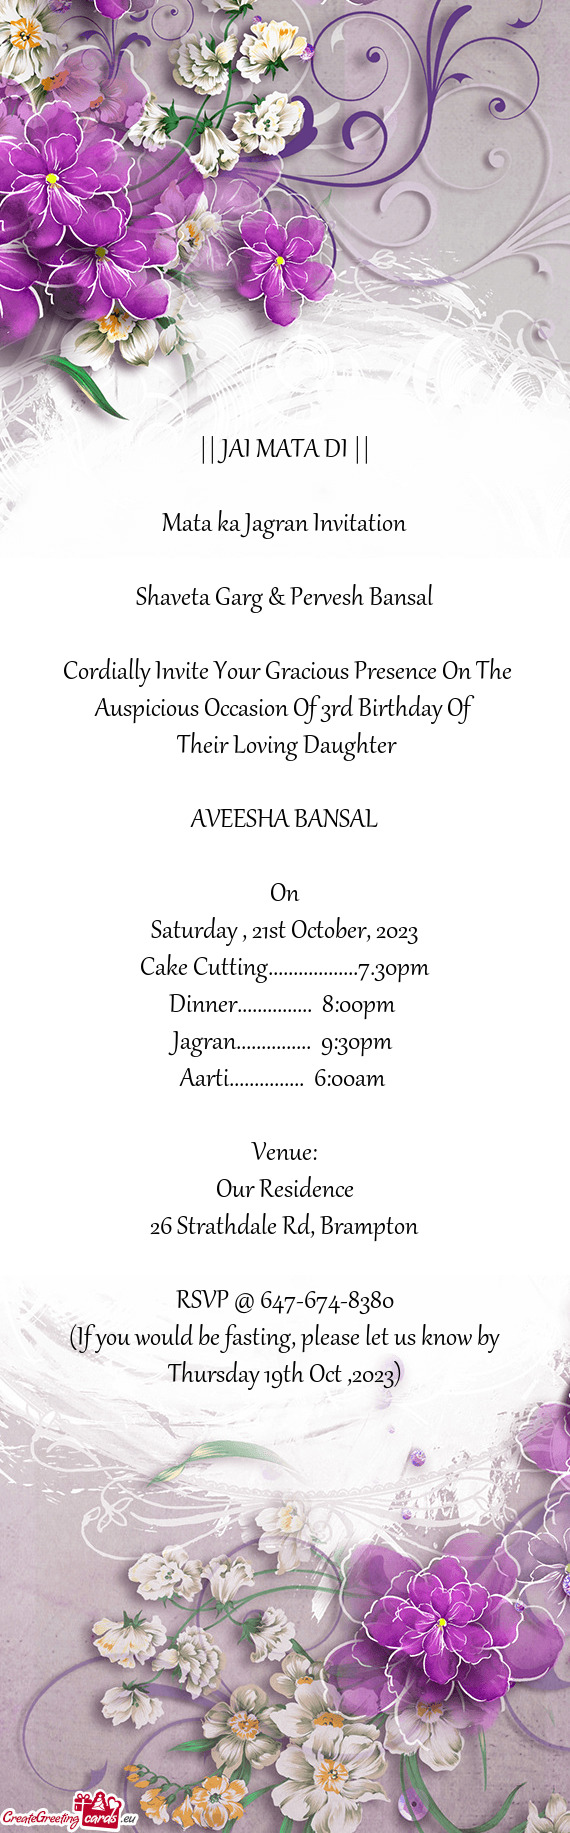 Cordially Invite Your Gracious Presence On The Auspicious Occasion Of 3rd Birthday Of